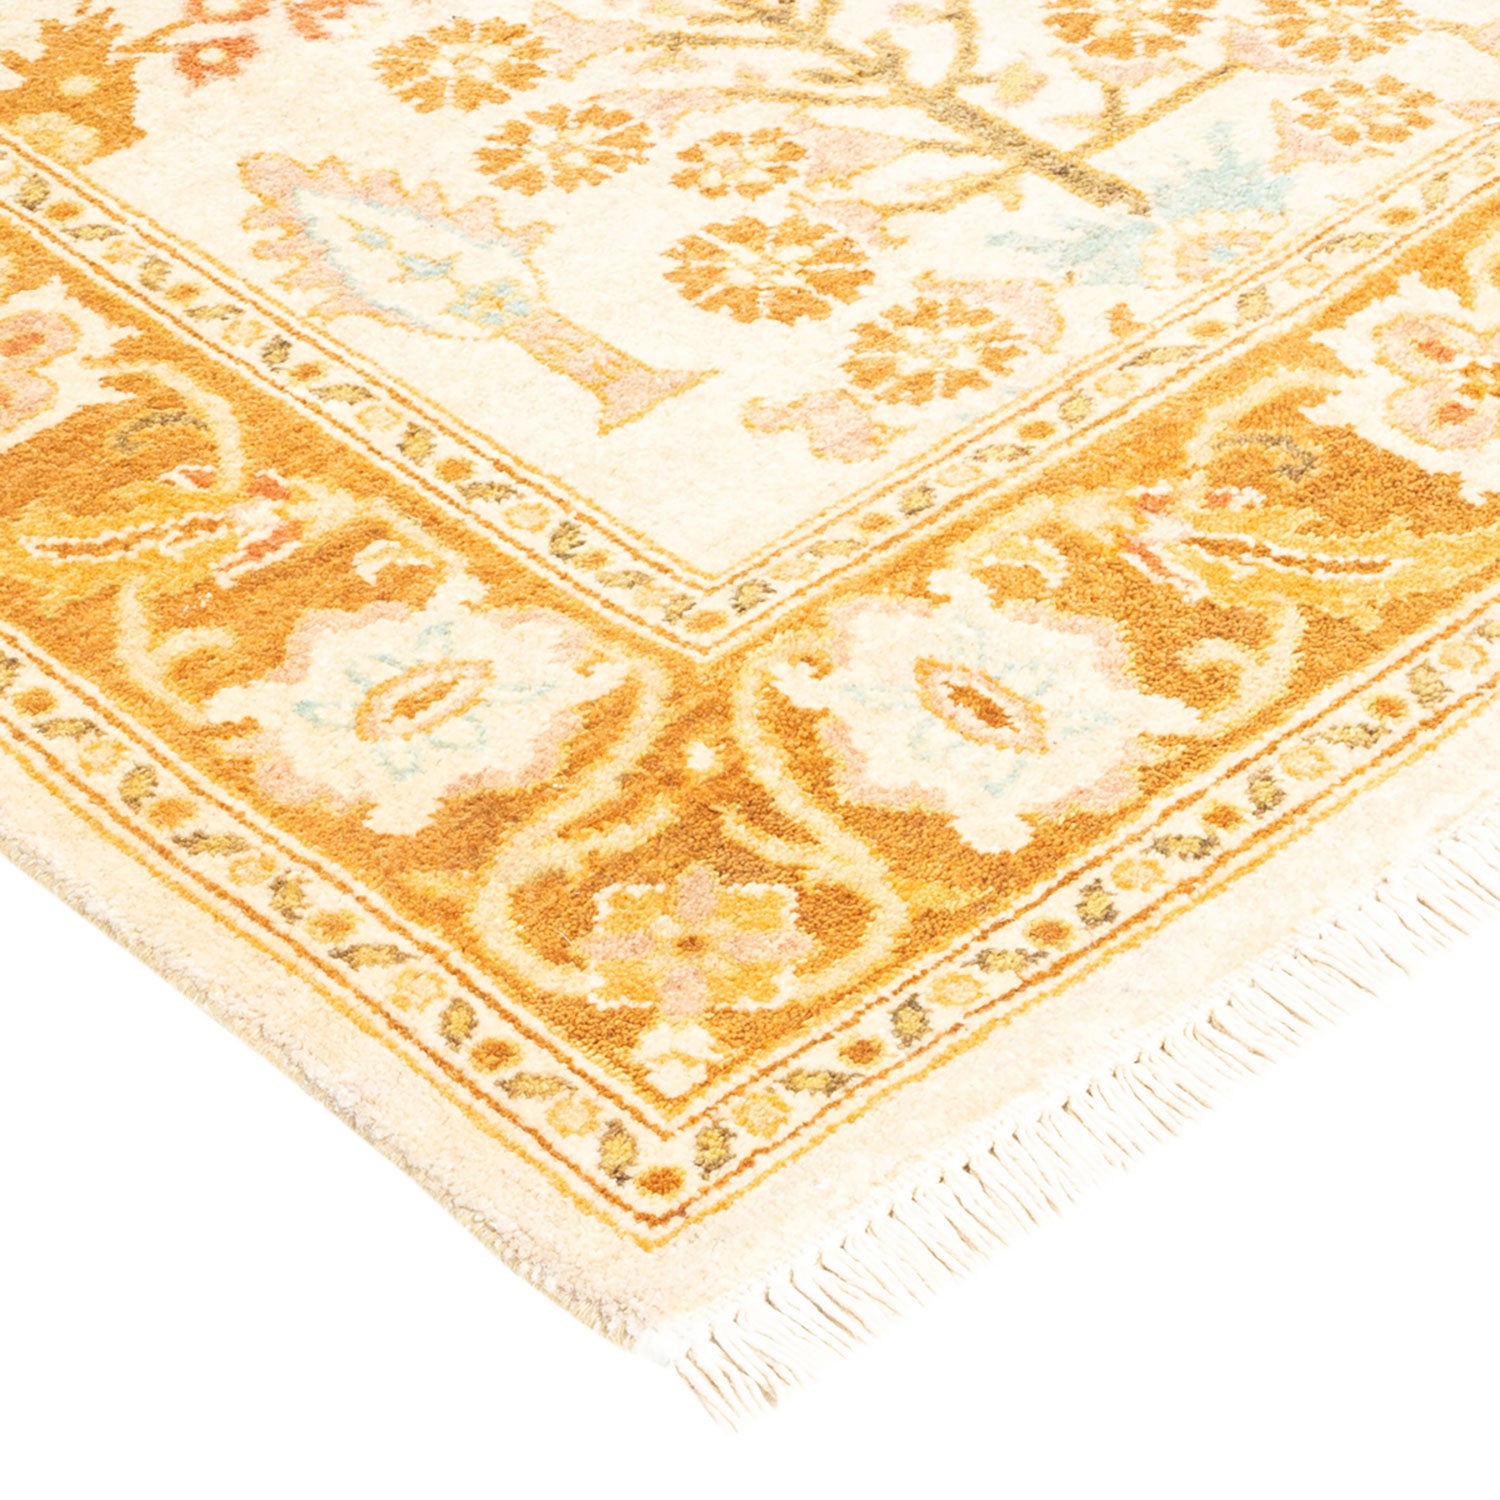 Intricately designed classical rug showcasing floral motifs in warm tones.